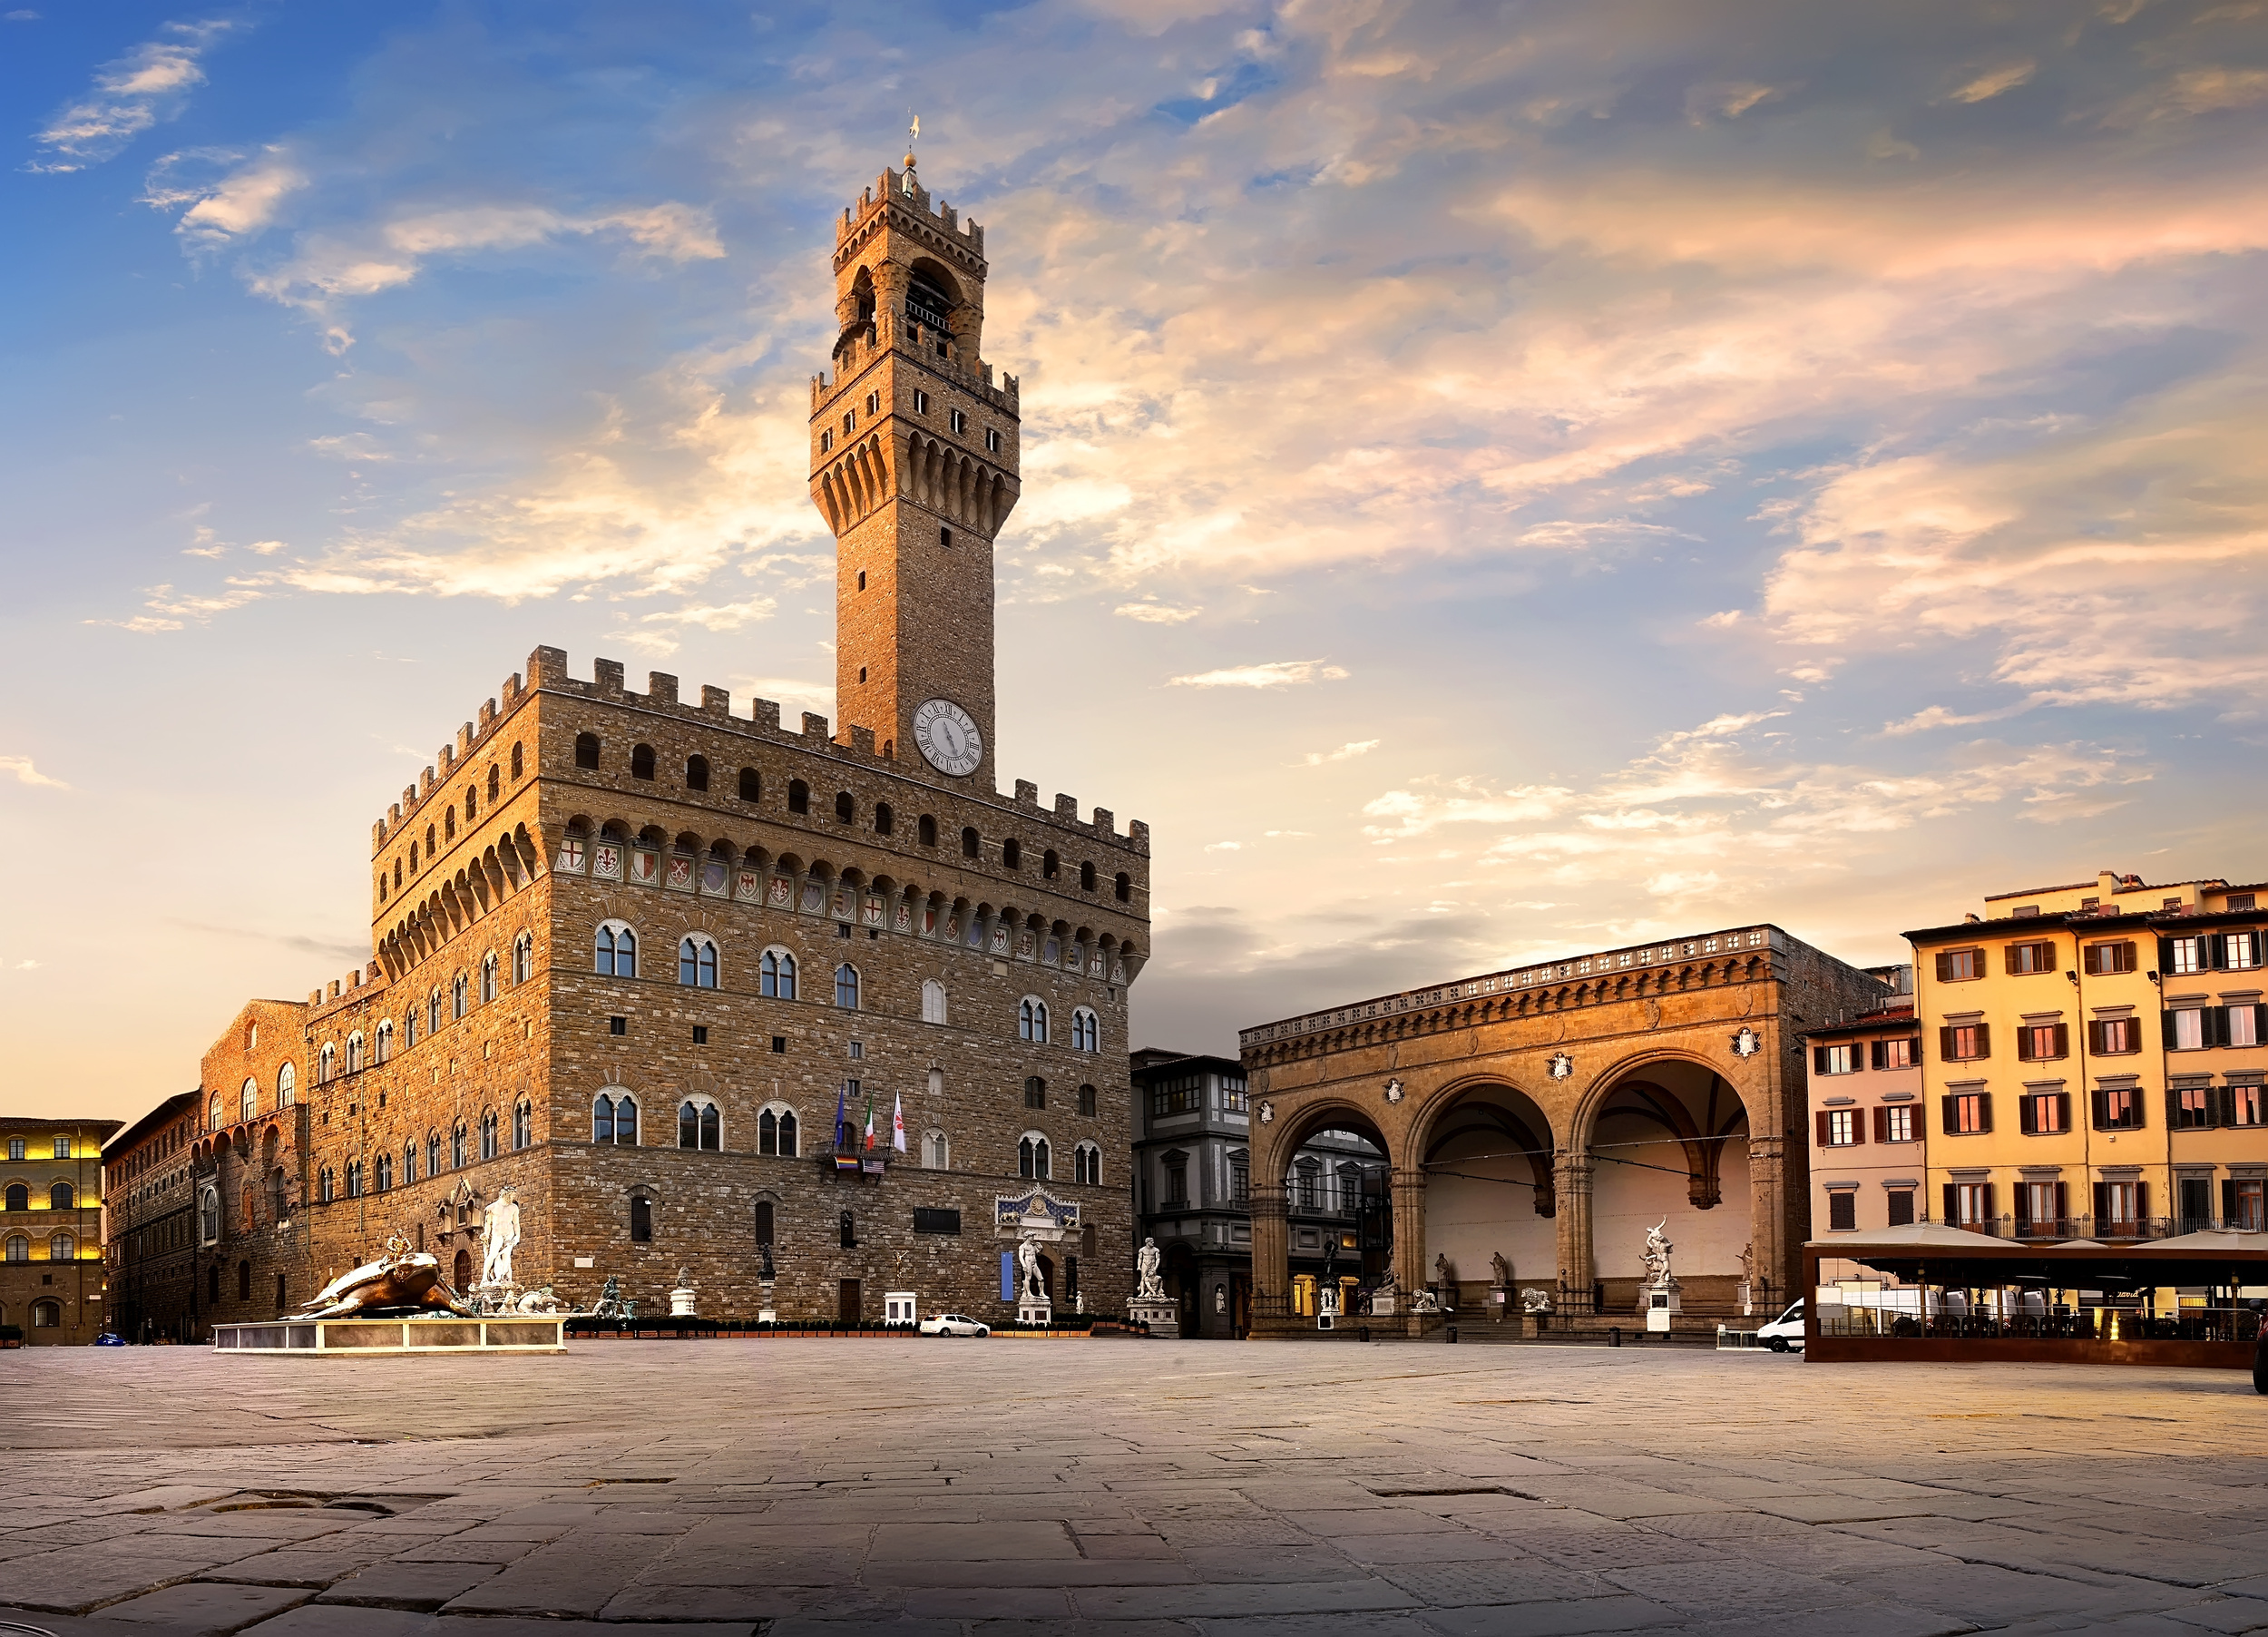 <p>Palazzo Vecchio is a gorgeous structure in the main square, making it a great stop if you're short on time or want a birds-eye-view of Florence. Plus, the hall of 500 is a room you really can't miss.</p><p><a href='https://www.msn.com/en-us/community/channel/vid-cj9pqbr0vn9in2b6ddcd8sfgpfq6x6utp44fssrv6mc2gtybw0us'>Follow us on MSN to see more of our exclusive lifestyle content.</a></p>